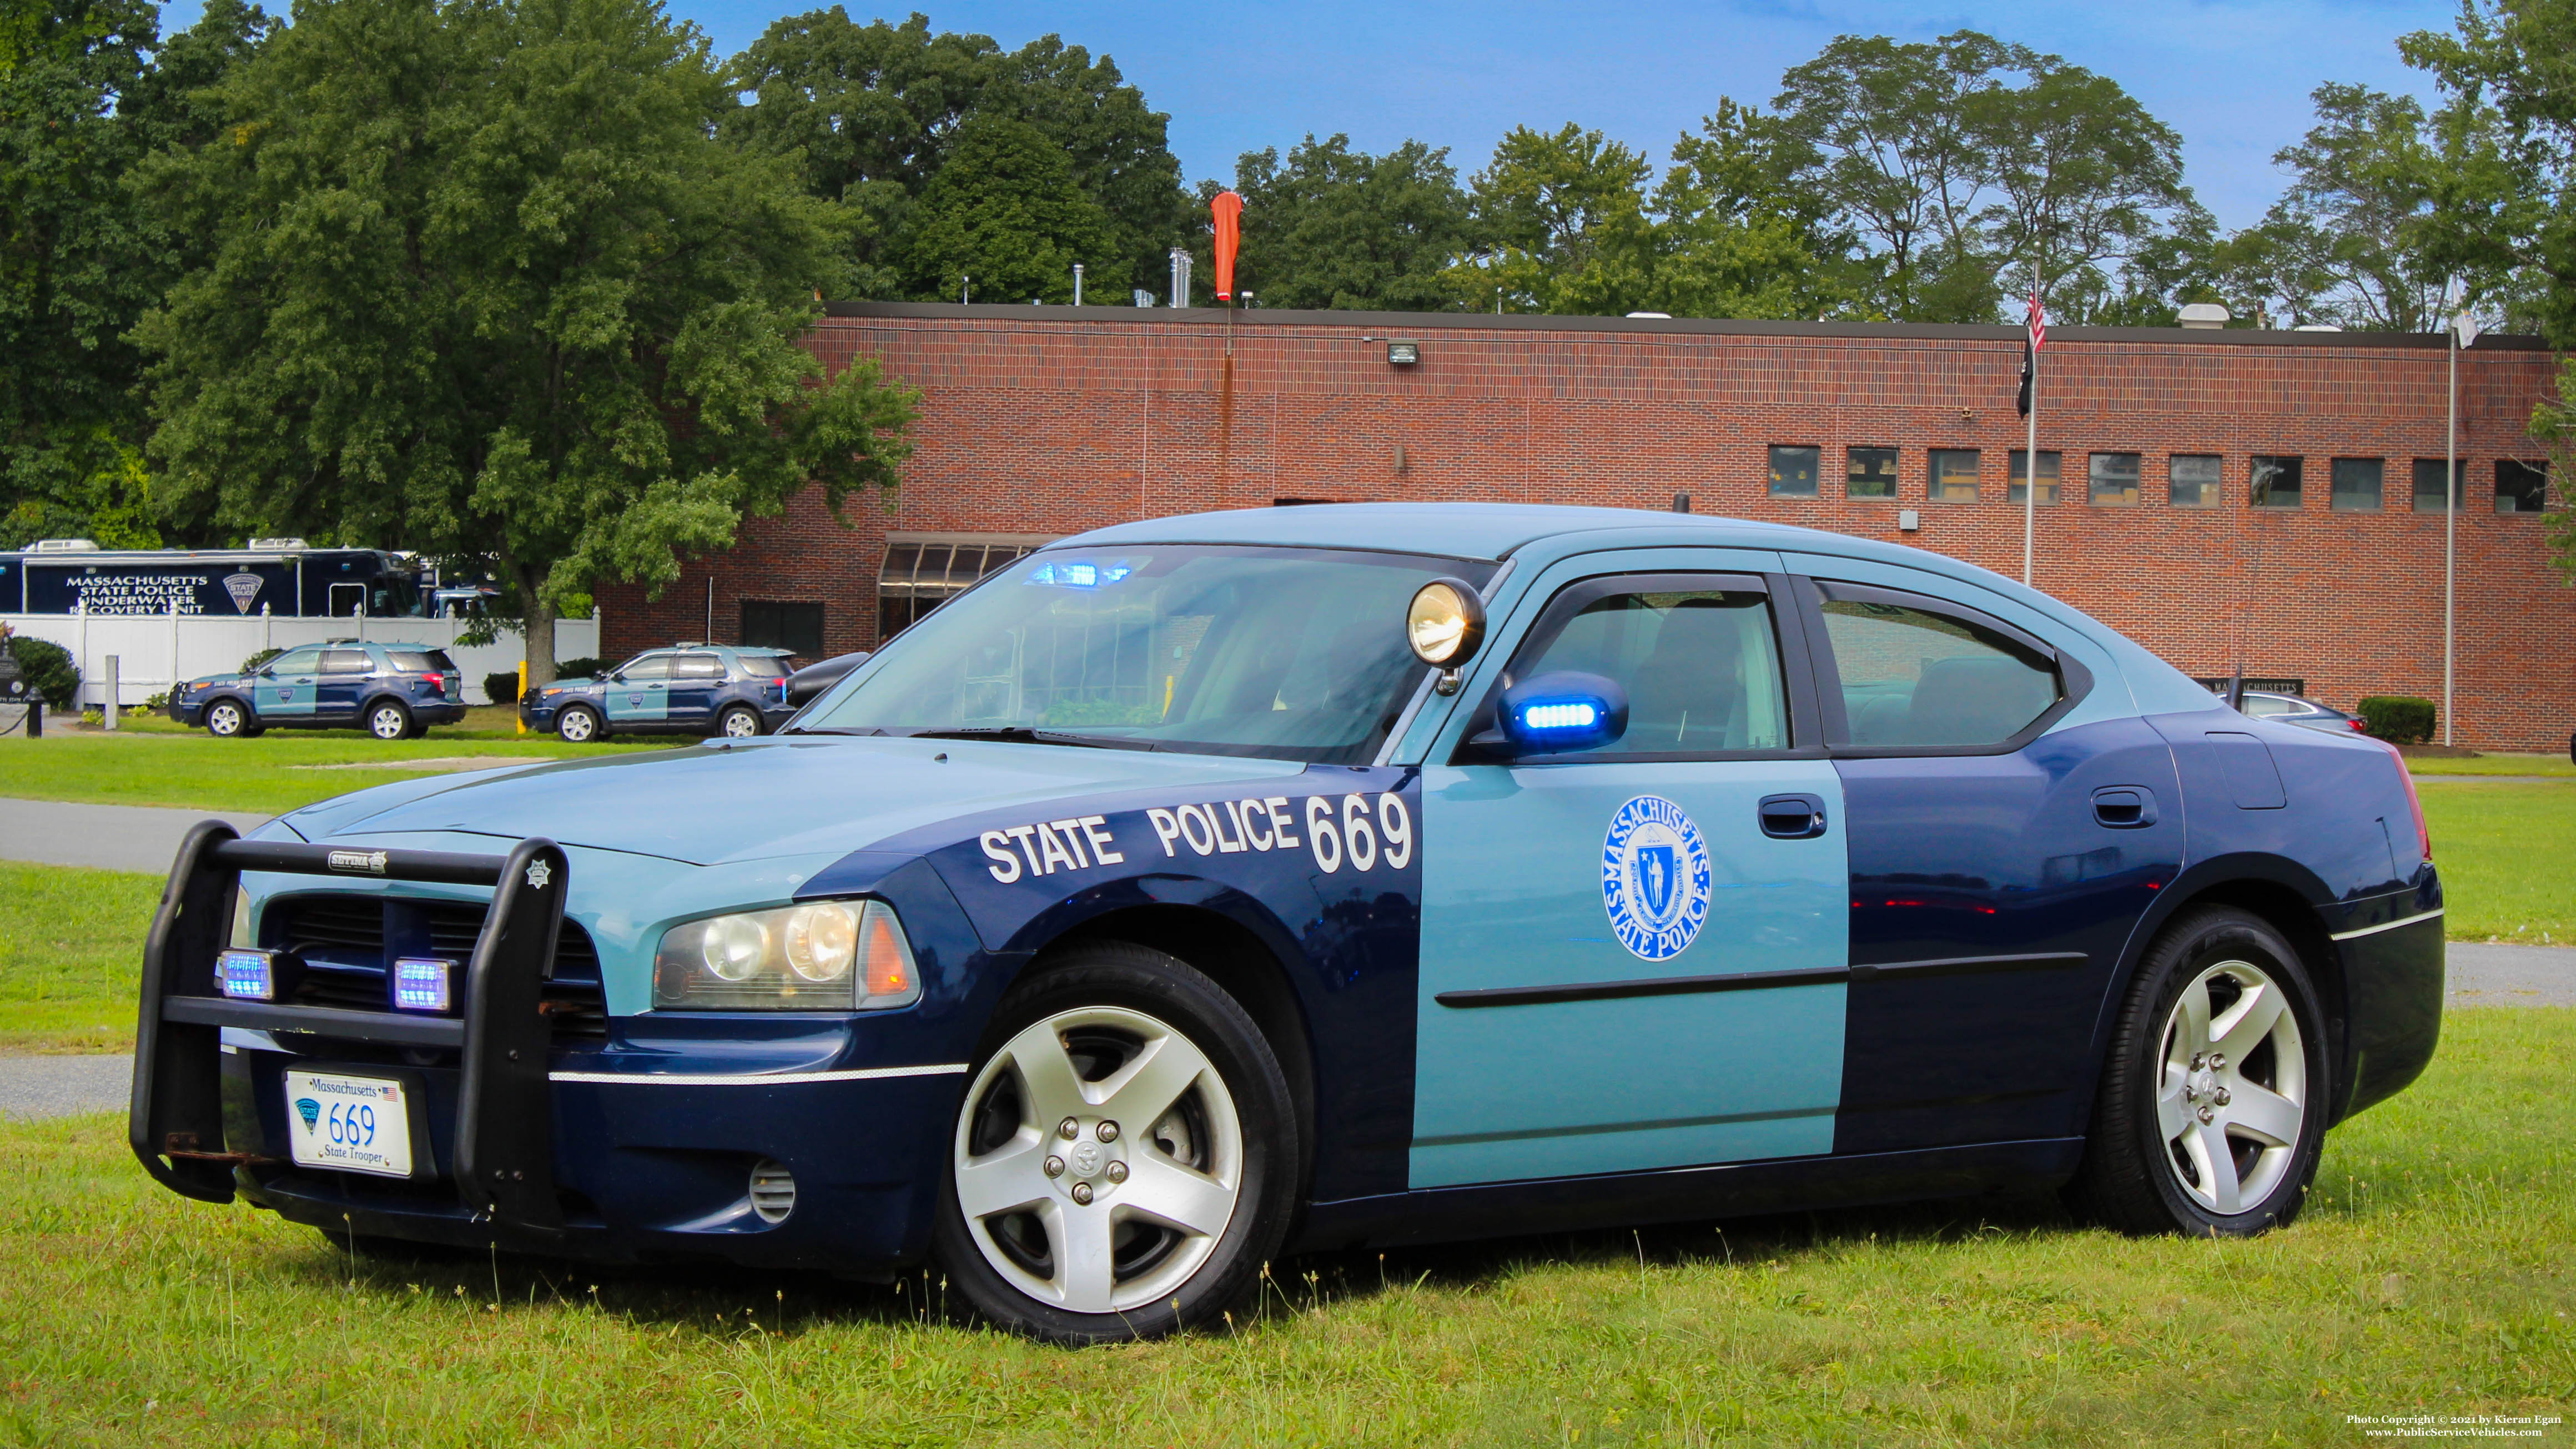 A photo  of Massachusetts State Police
            Cruiser 669, a 2007 Dodge Charger             taken by Kieran Egan